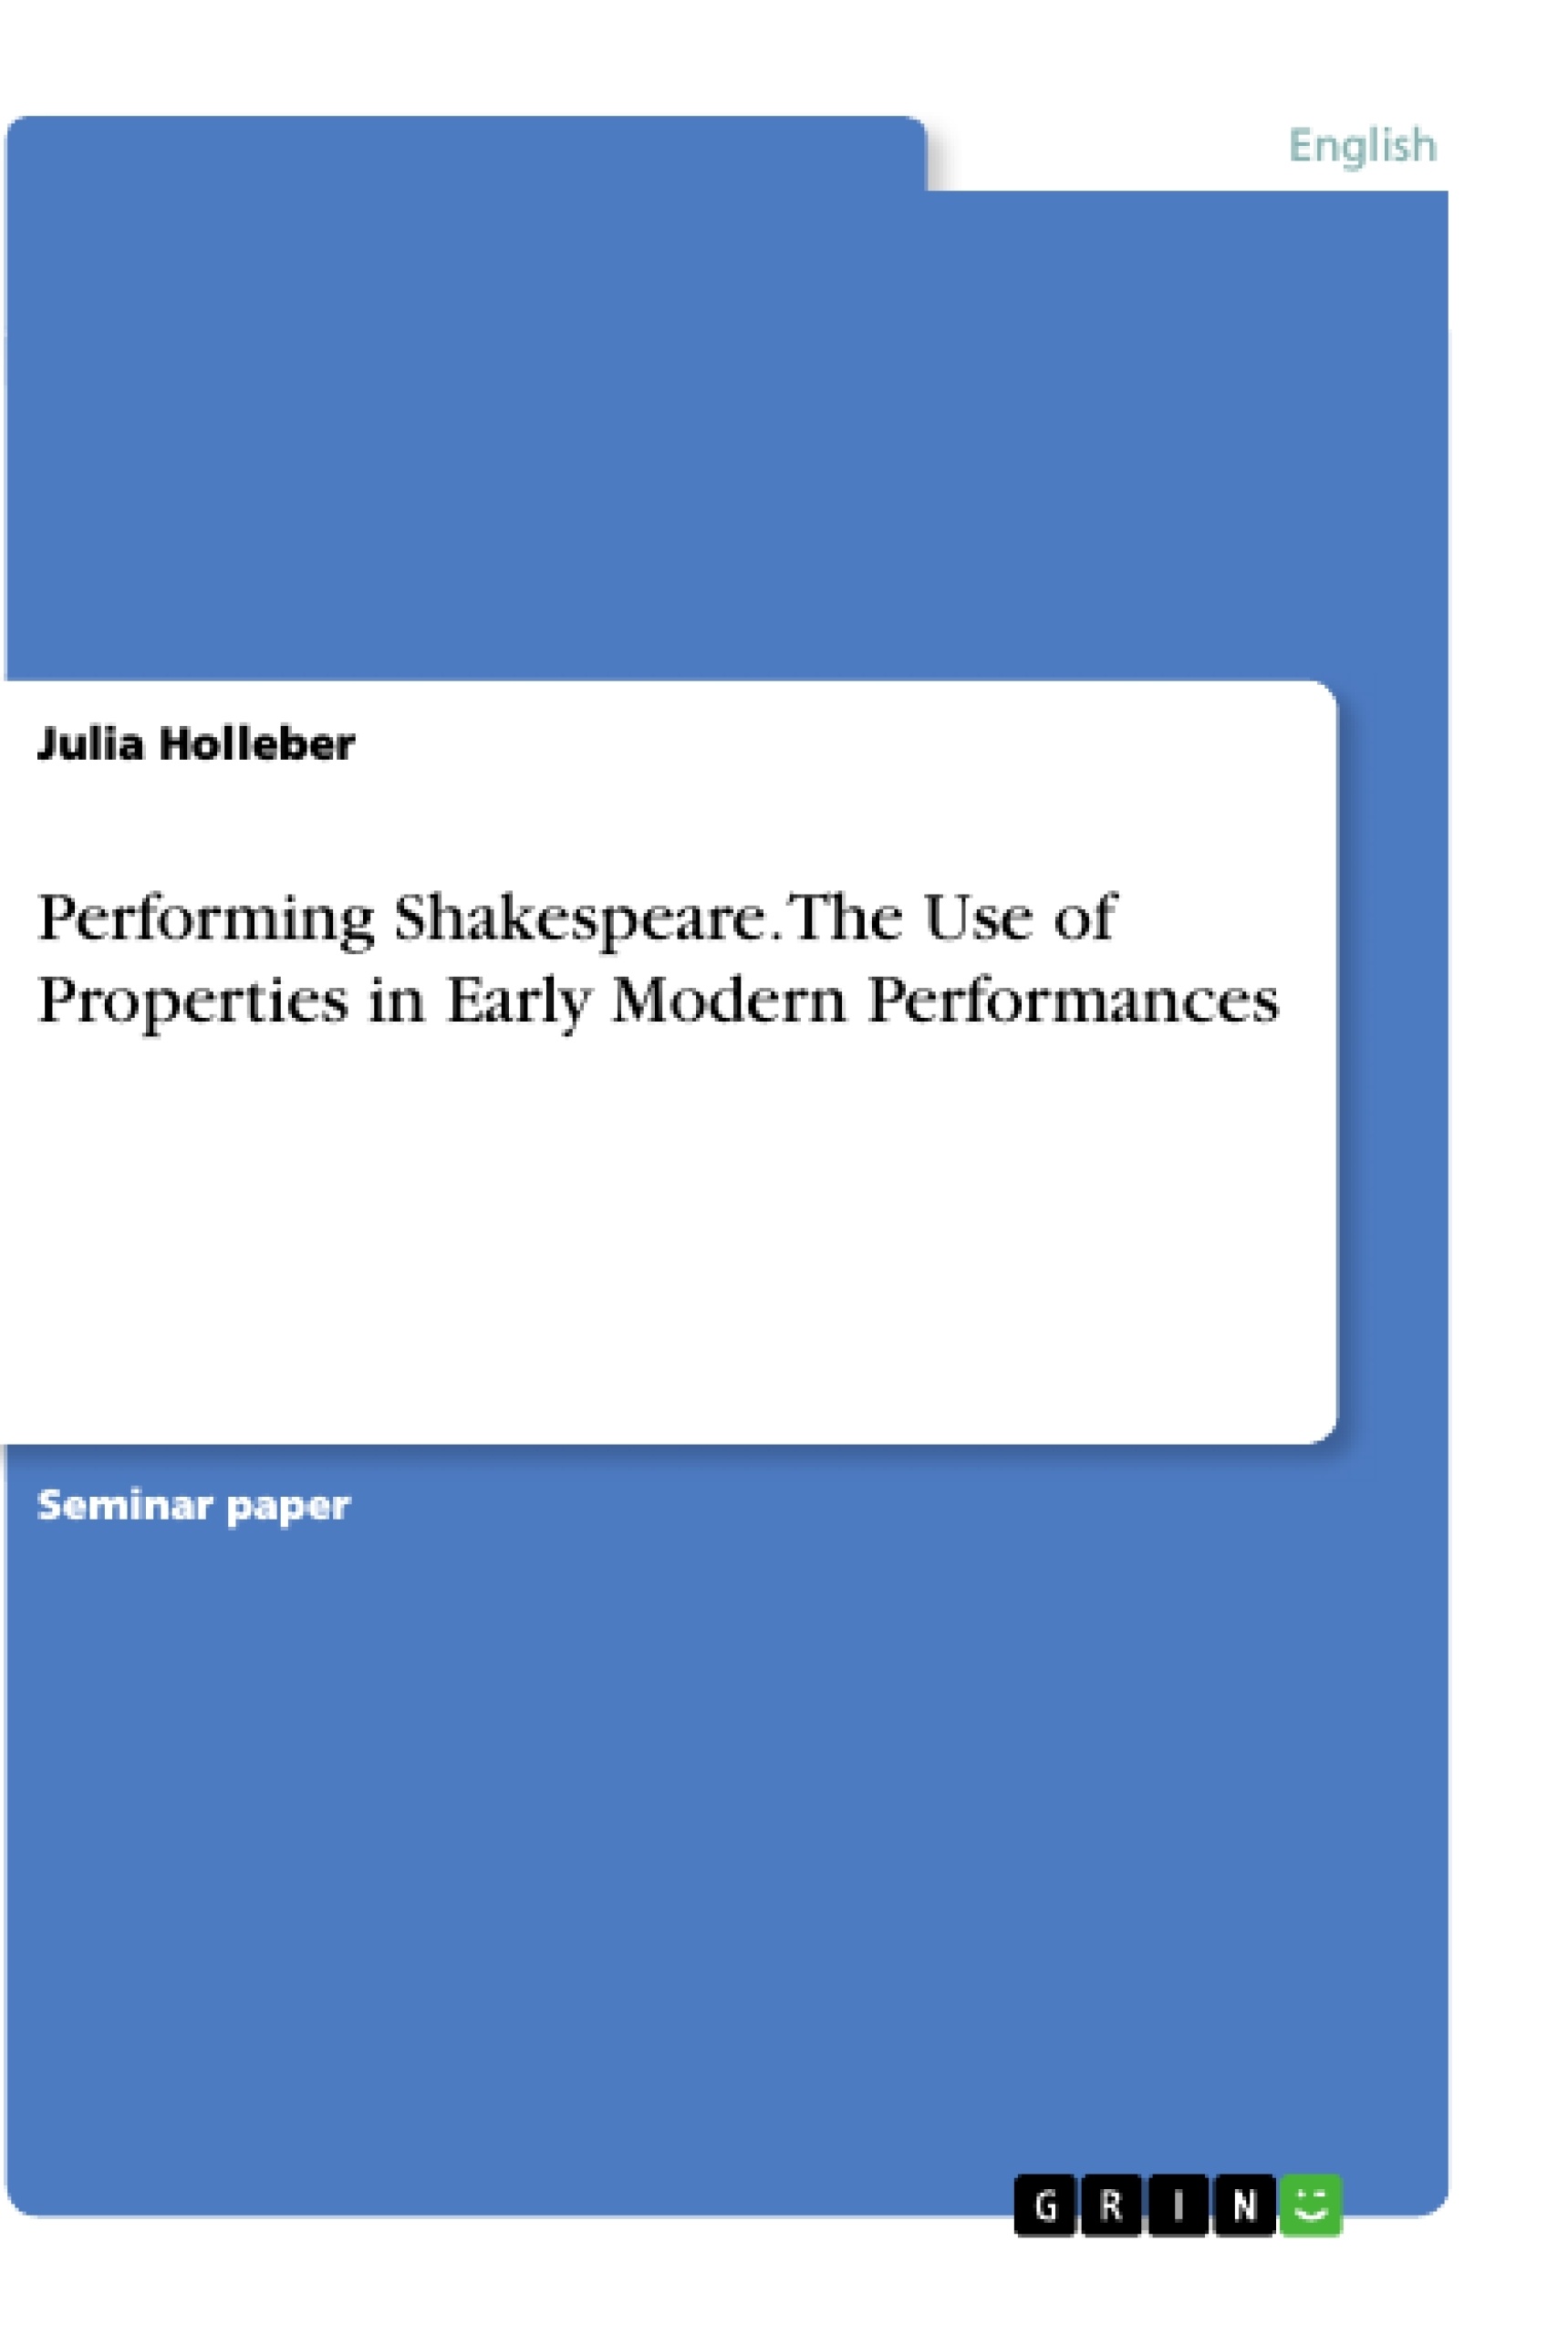 Título: Performing Shakespeare. The Use of Properties in Early Modern Performances